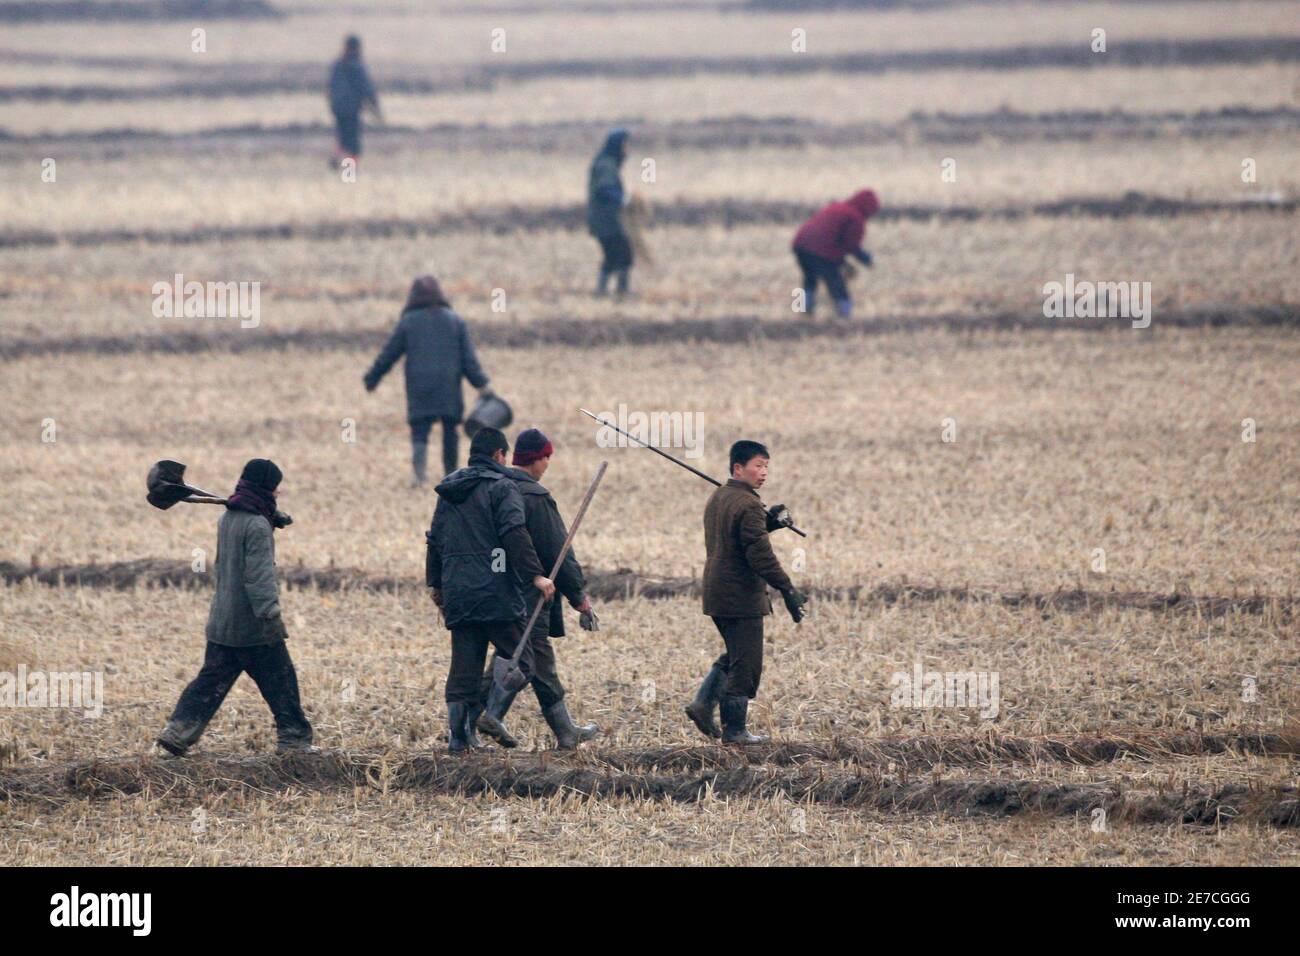 North Koreans walk on a farm field at the North Korean town of Sinuiju, opposite the Chinese border city of Dandong February 25, 2010. North Korea's neighbours and the United States want fresh momentum in trying to restart talks about ending Pyongyang's nuclear arms programme, a U.S. envoy said, while giving no signs of an impending breakthrough. REUTERS/Jacky Chen (NORTH KOREA - Tags: POLITICS MILITARY) Stock Photo